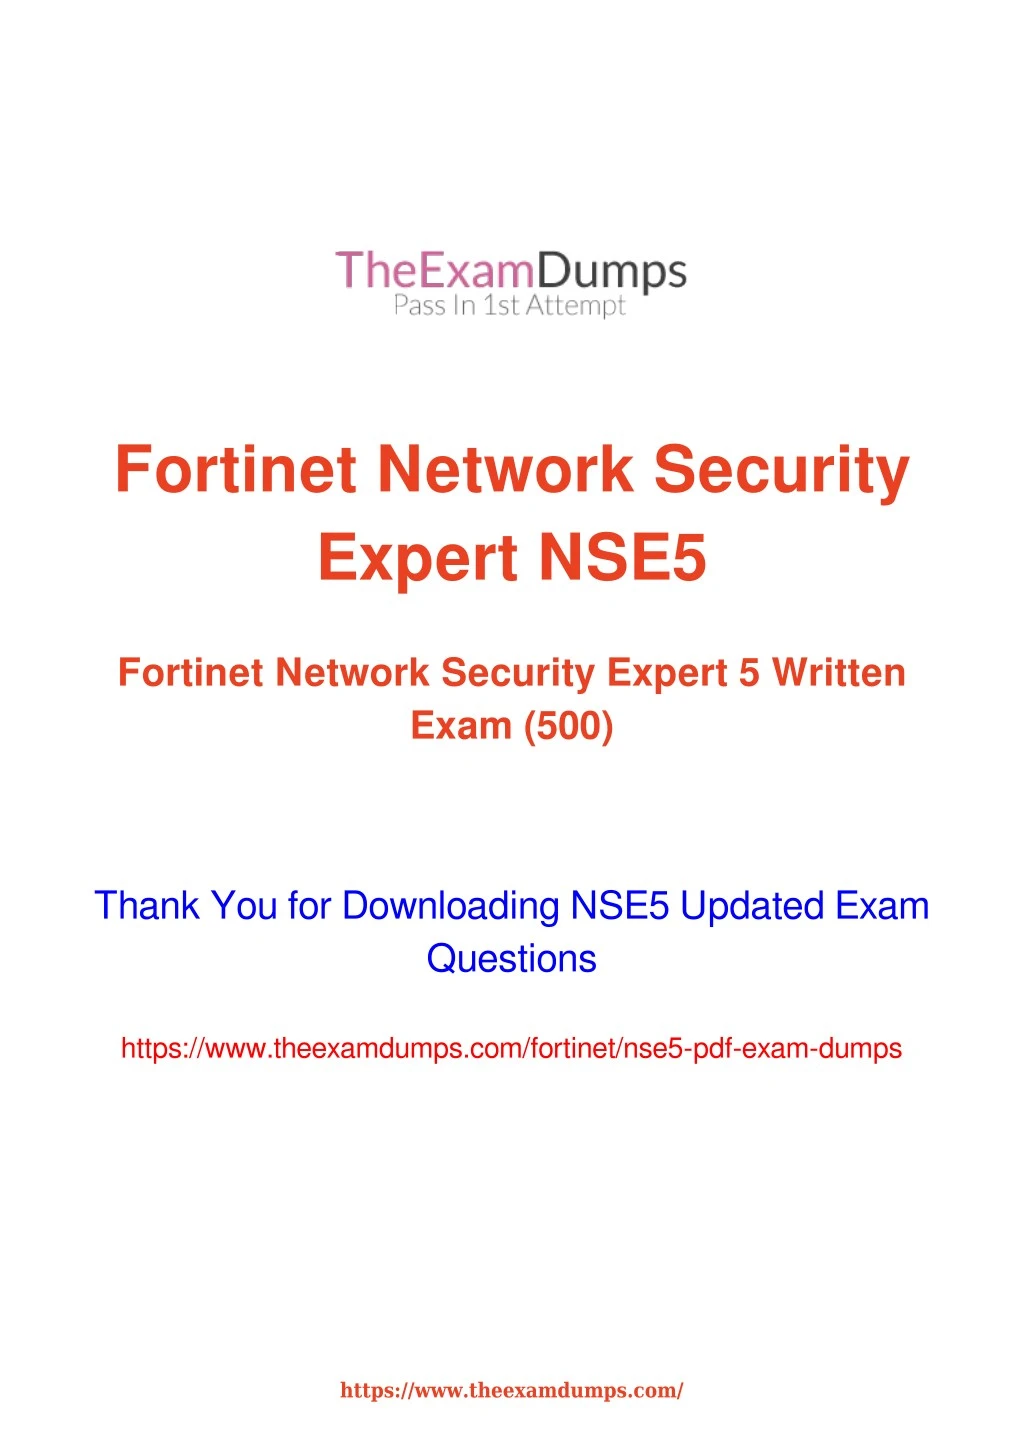 fortinet network security expert nse5